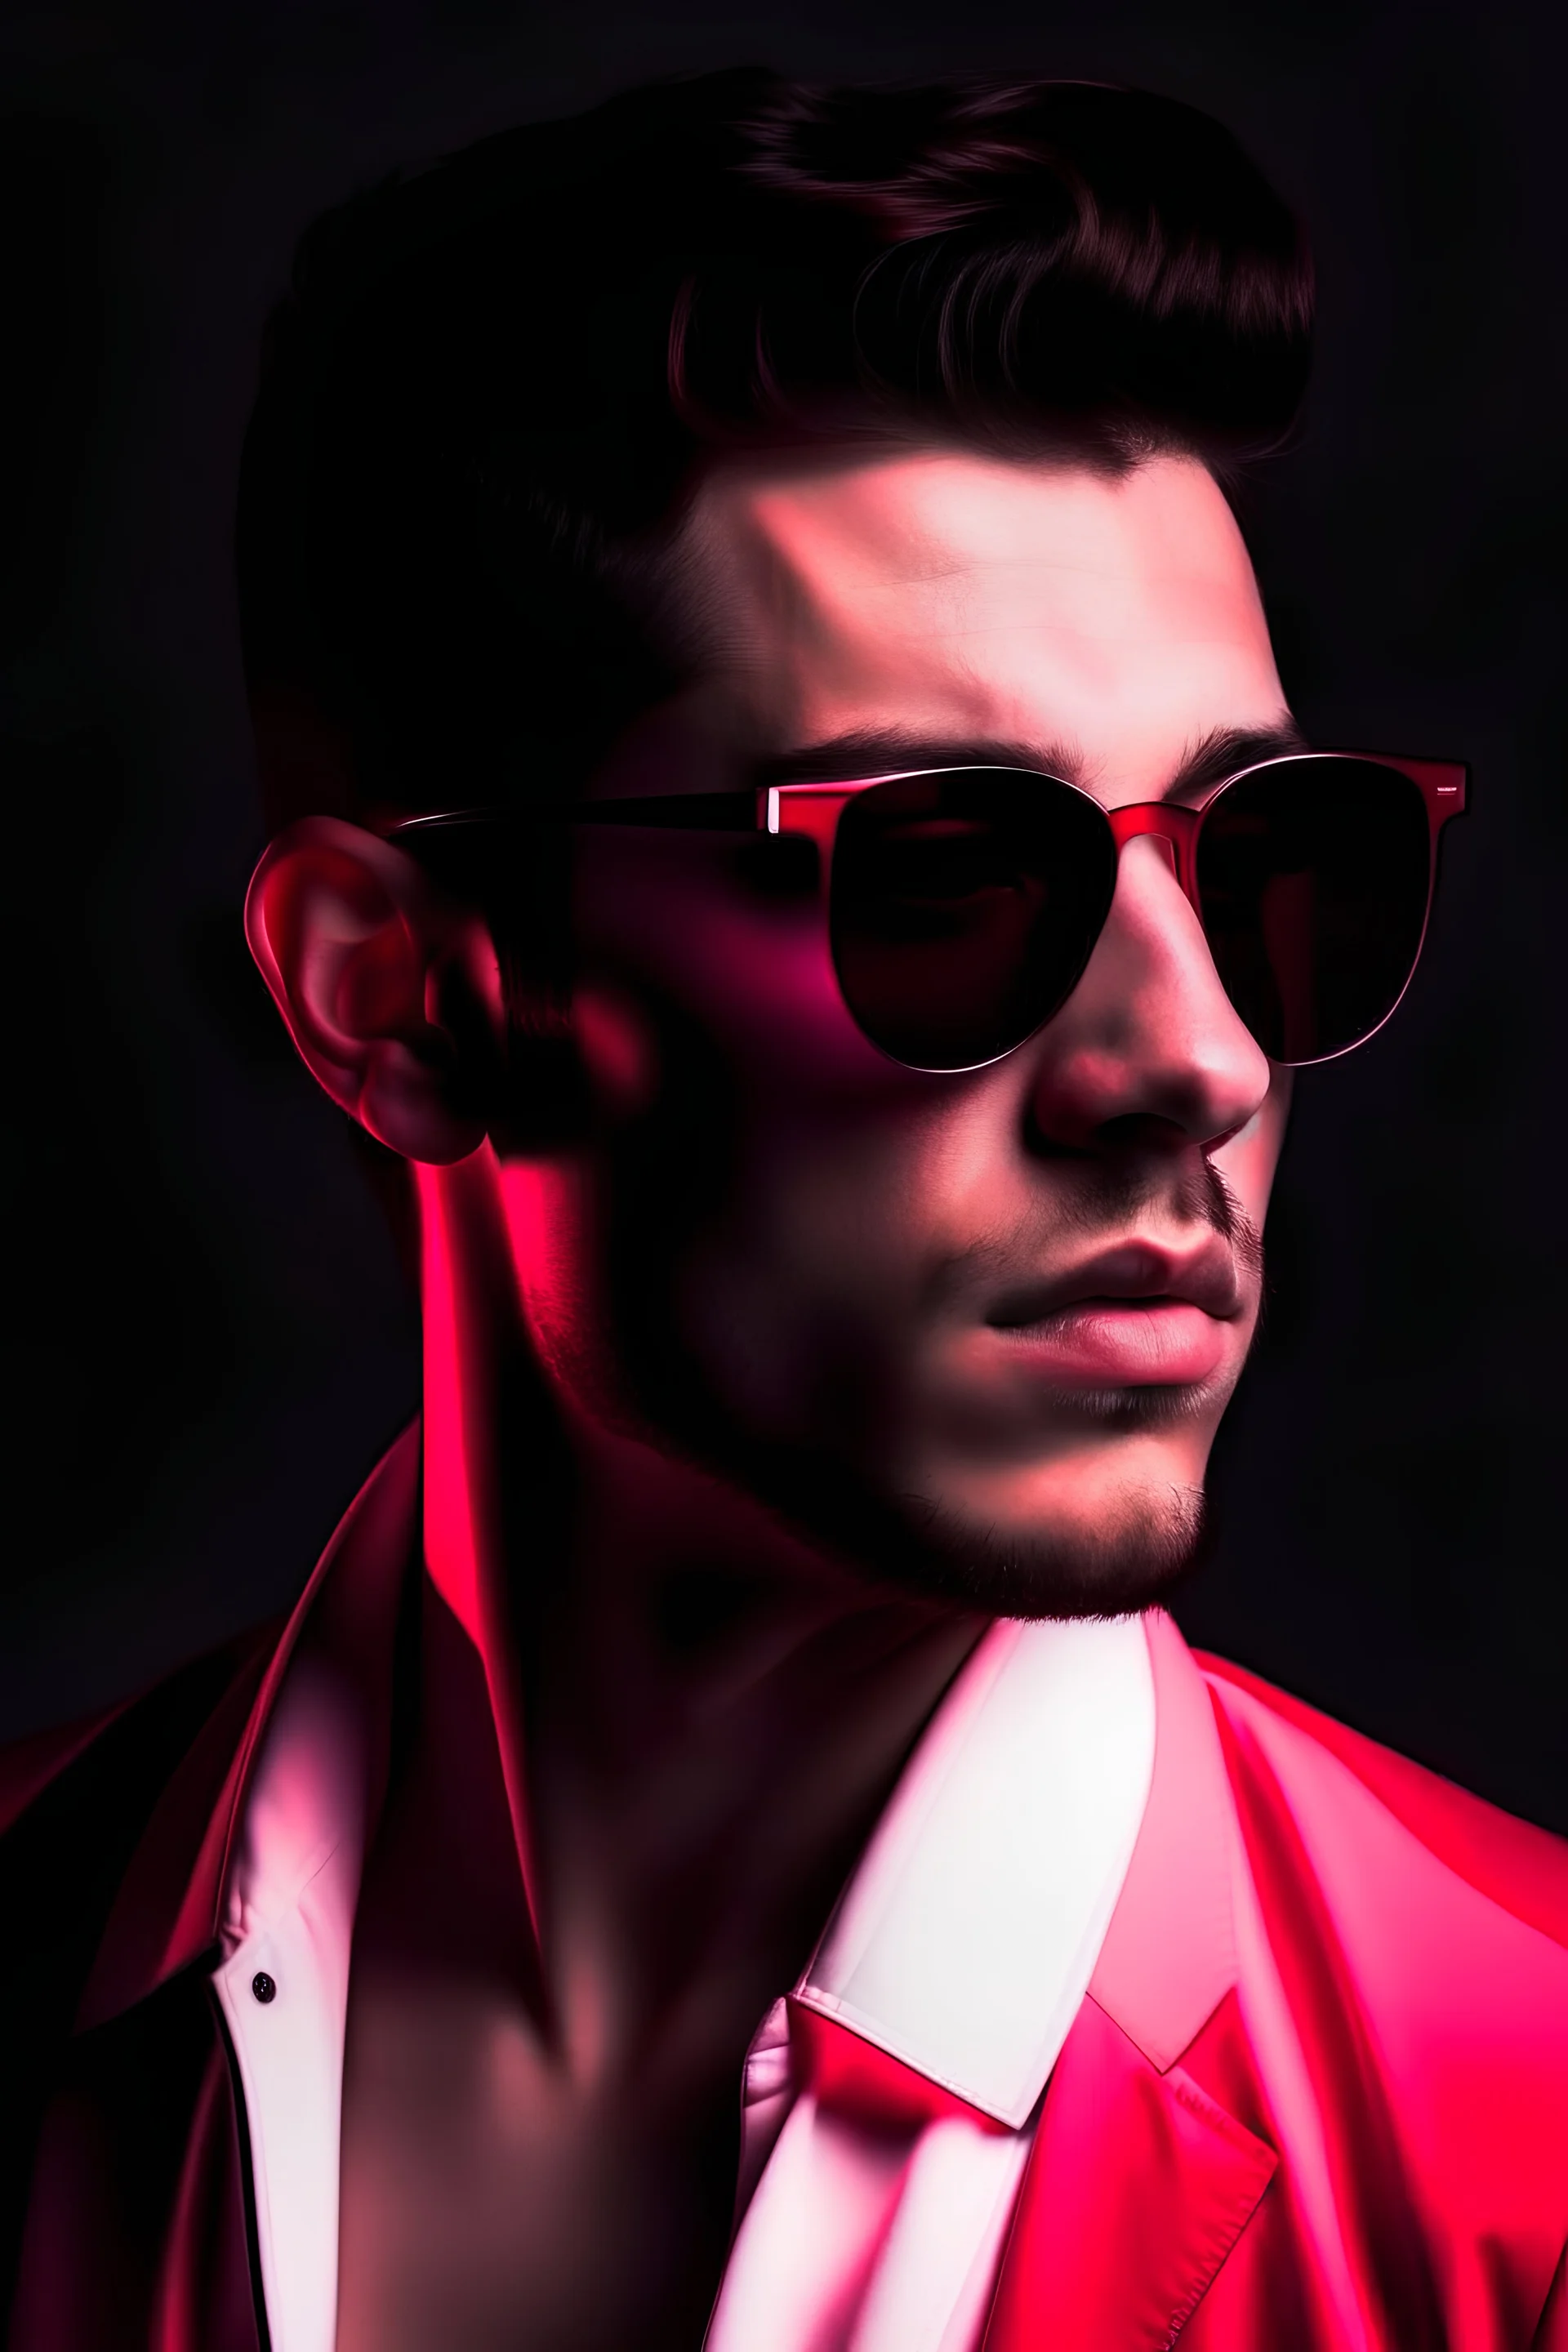 Reference, Hot guy, in dark red and white shades